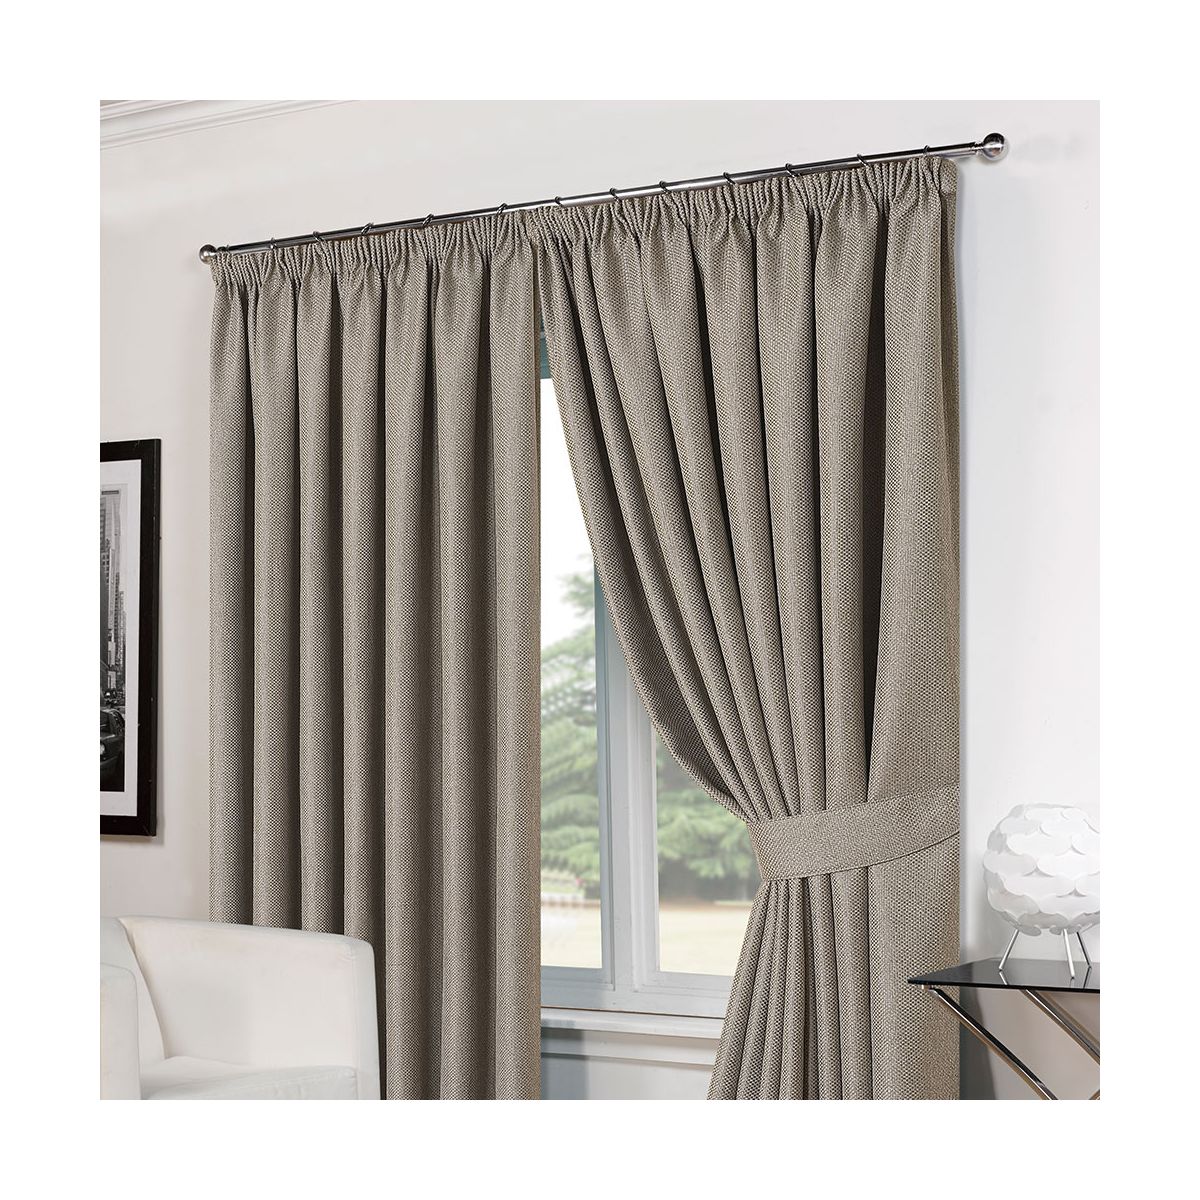 Luxury Basket Weave Lined Tape Top Curtains with Tiebacks - Silver/Grey 66x54